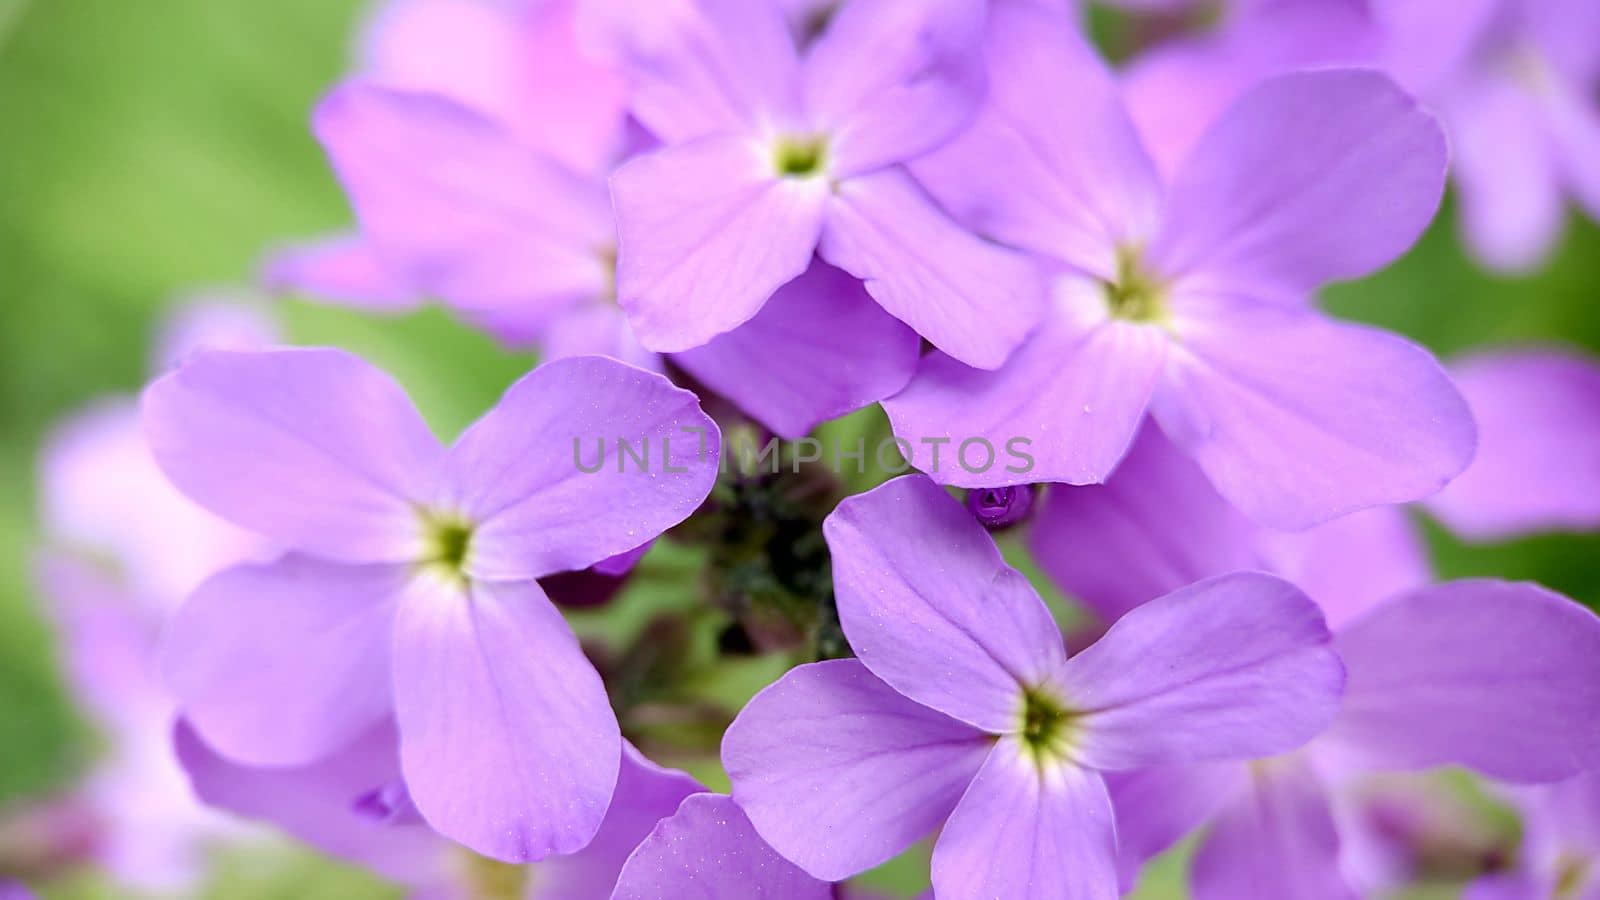 Macrophotography.Texture or background.Small blooming lilac phlox flowers close-up.